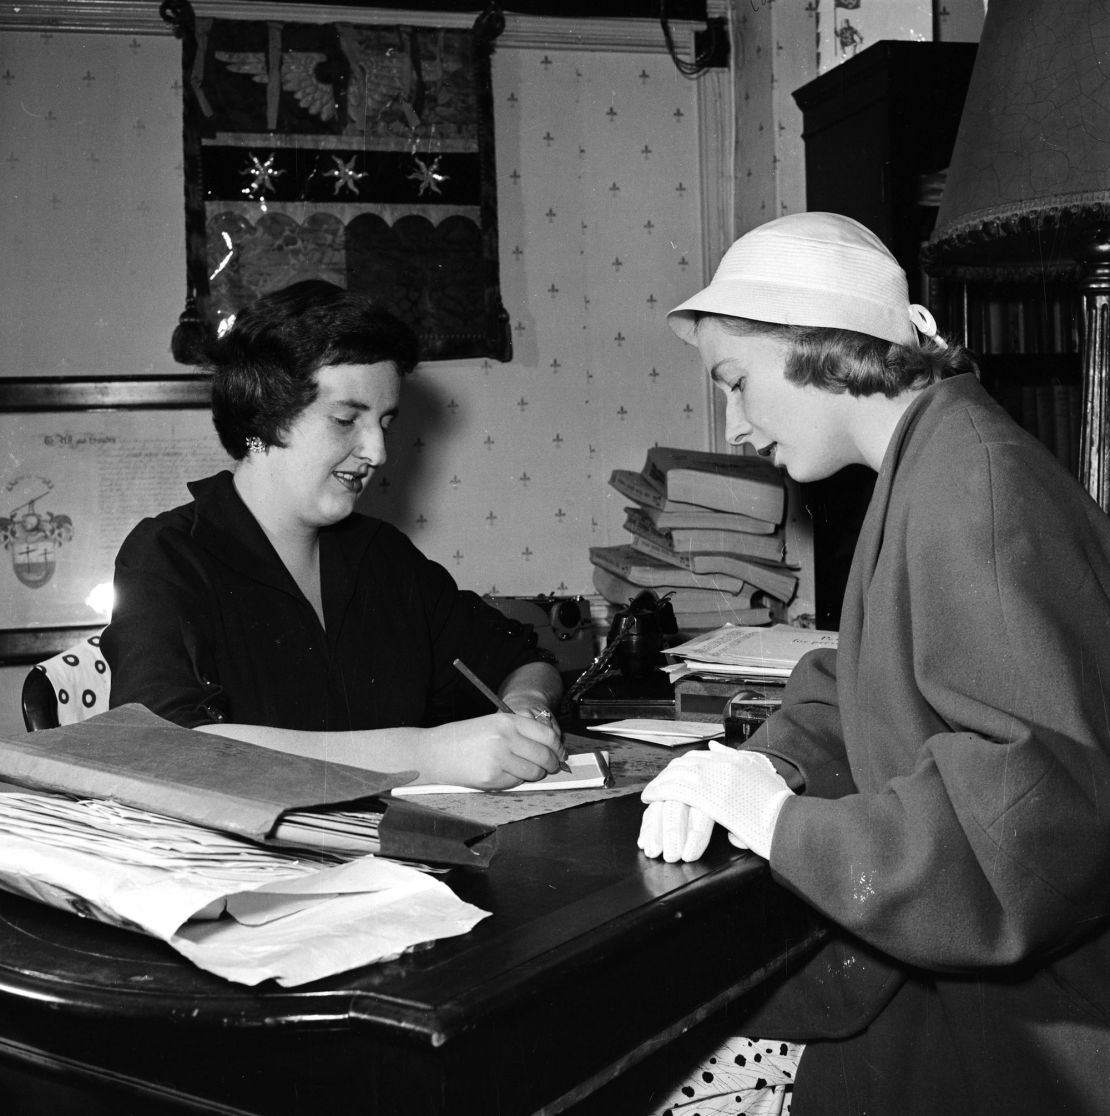 July, 1956: A woman traces her family tree in the UK Public Record Office.